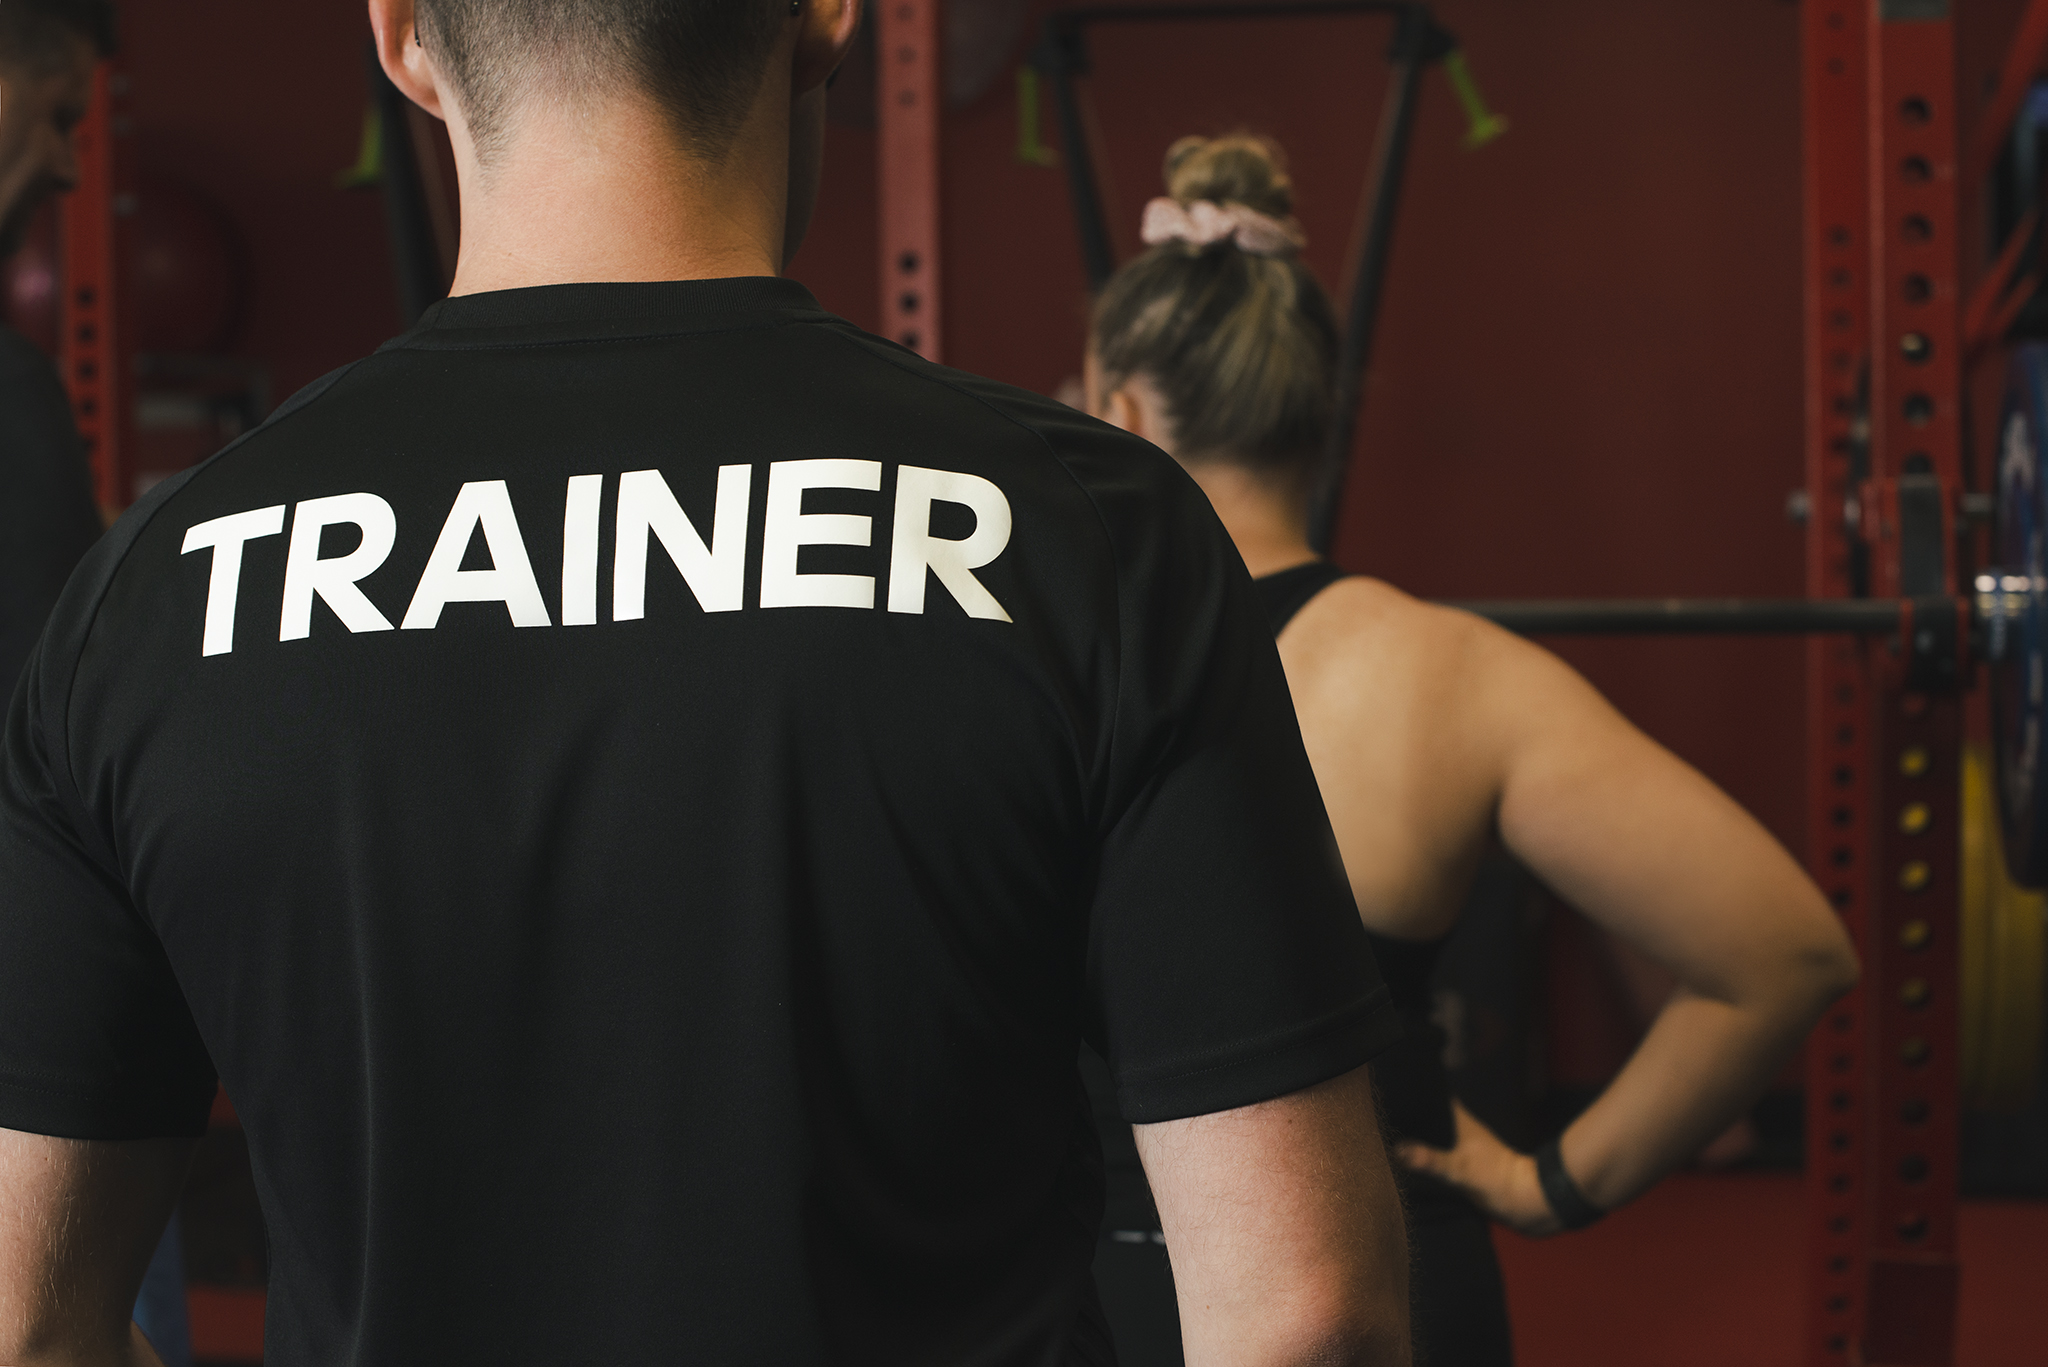 The camera looks over the shoulder of a personal trainer on the left and focuses on the word TRAINER, which is written in white on the back of a black shirt. In the background you can see a fitness client standing at a weight bar in a red gym room. The image gives the impression that the trainer is watching the client in their workout.